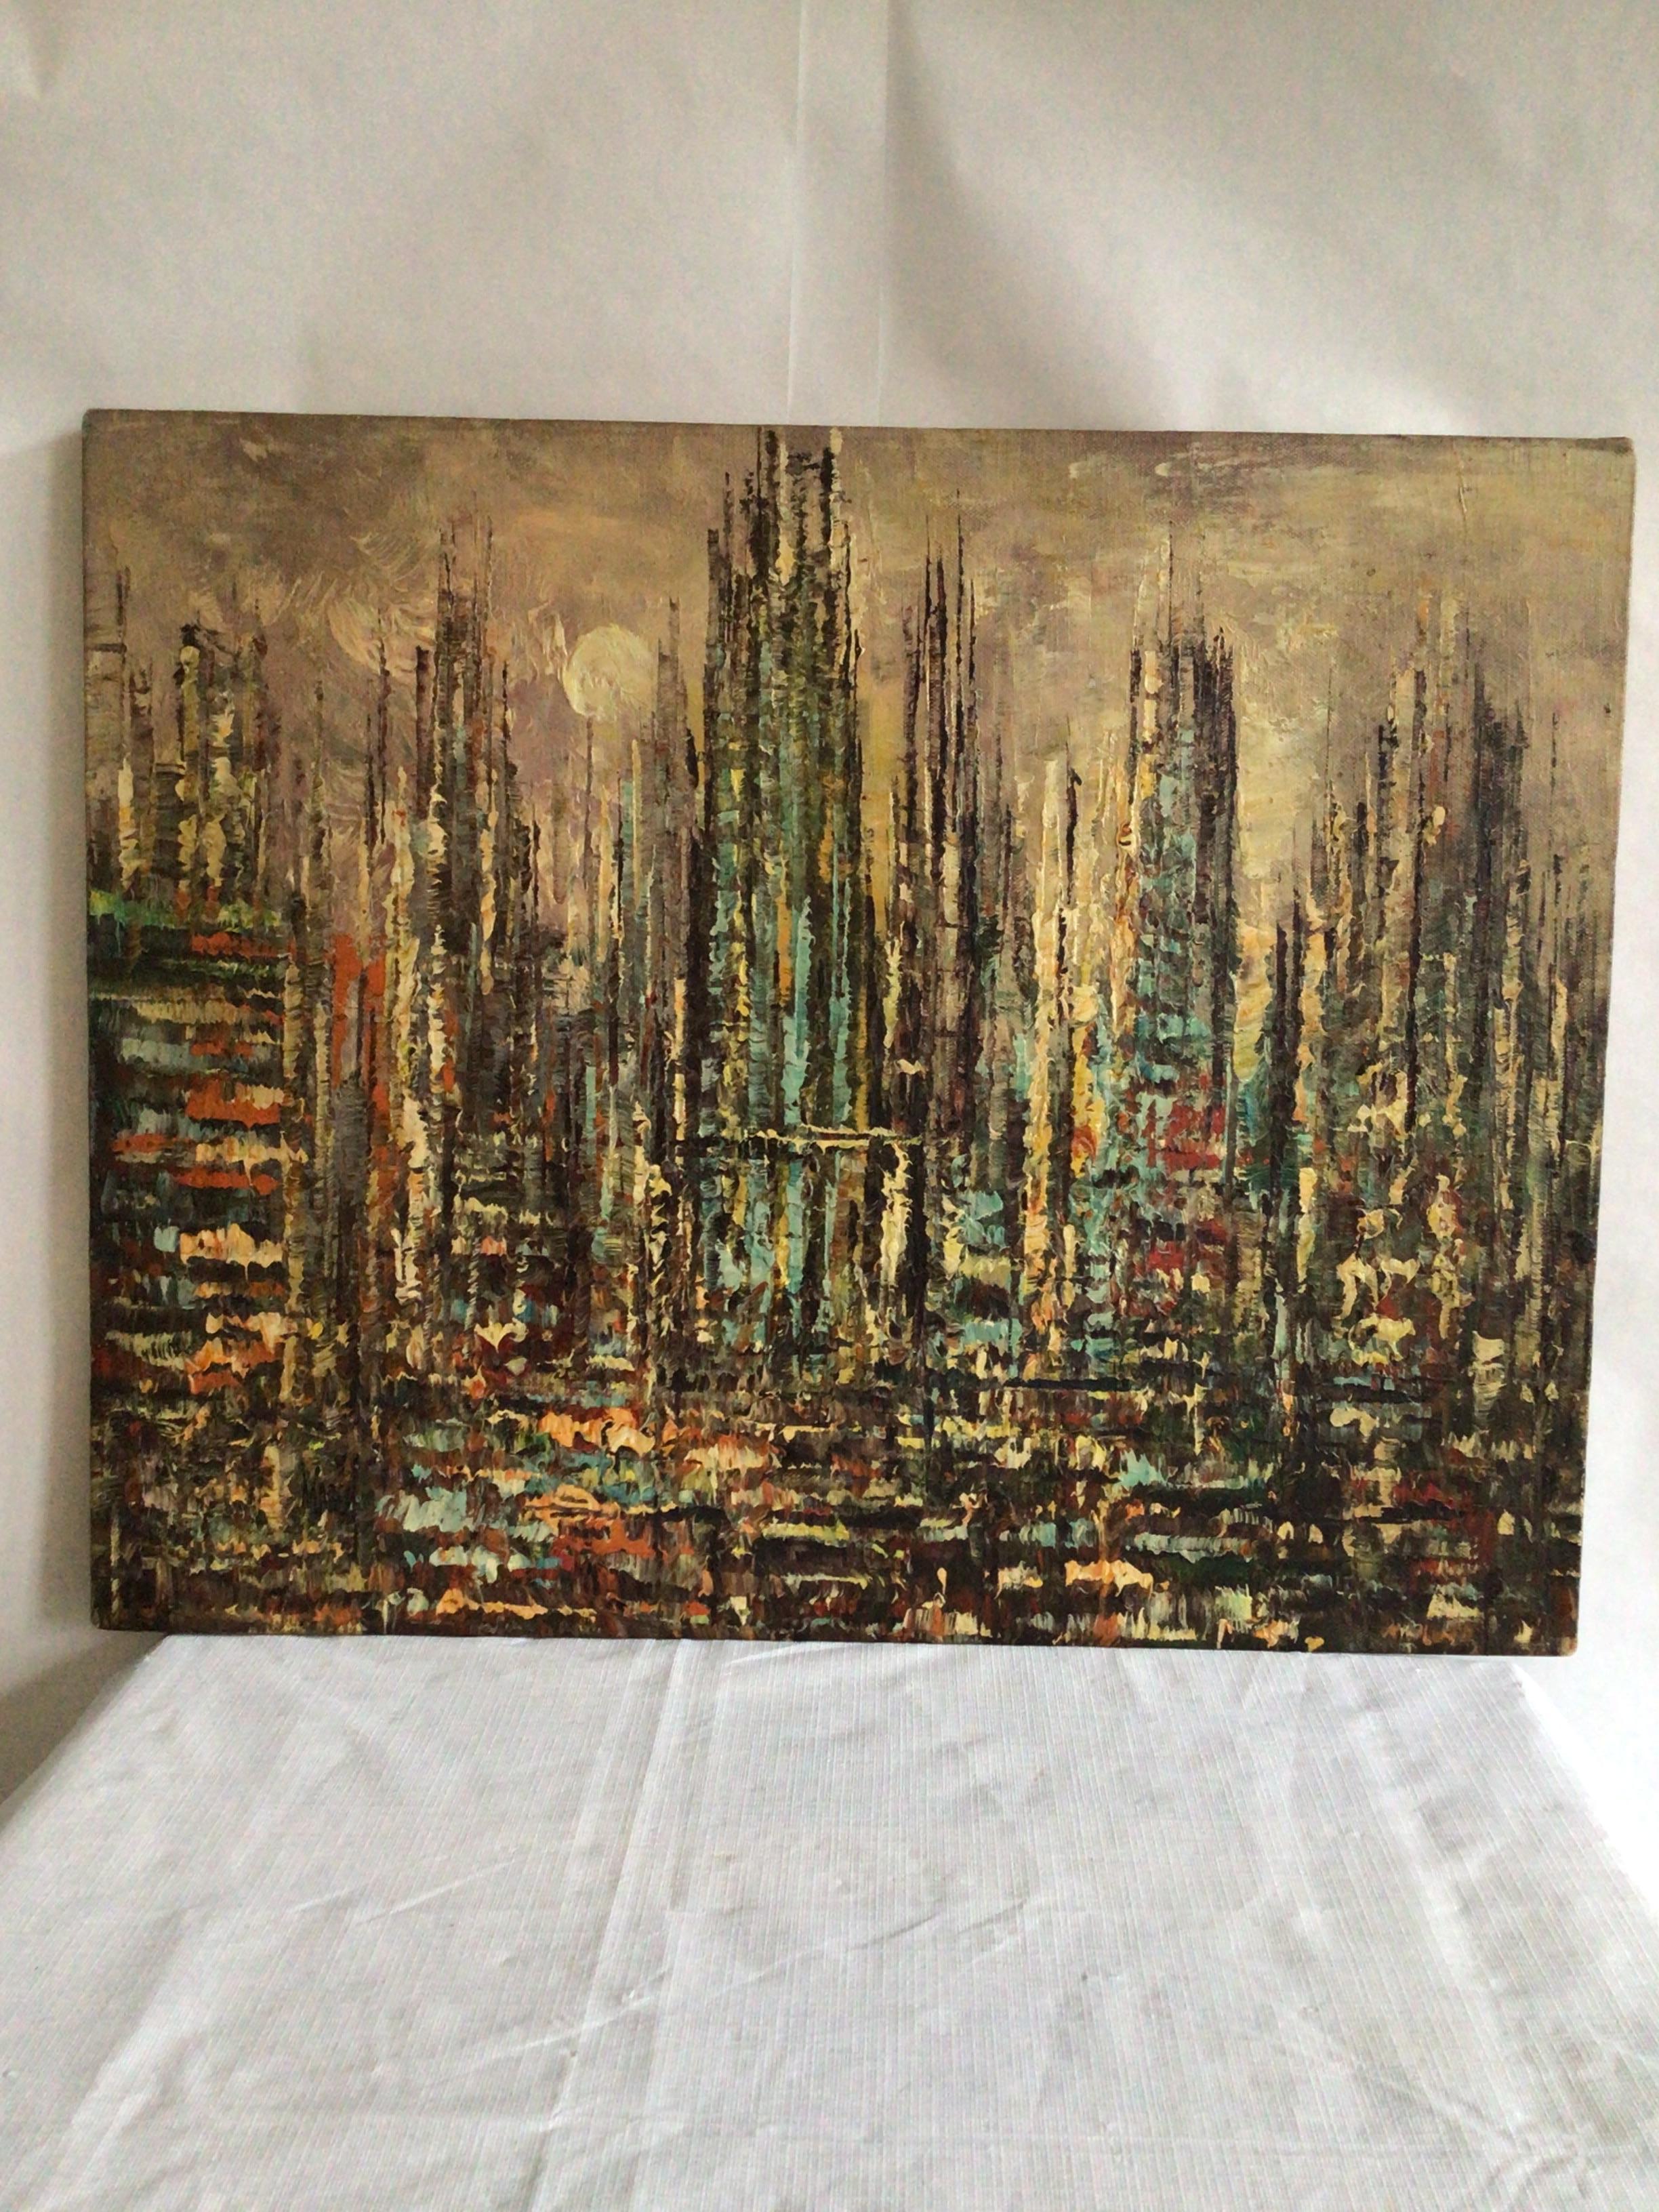 1950s Oil Painting on Canvas Of Abstract Cityscape
Wood frame under stretched canvas
Skyscrapers against cloudy sky
